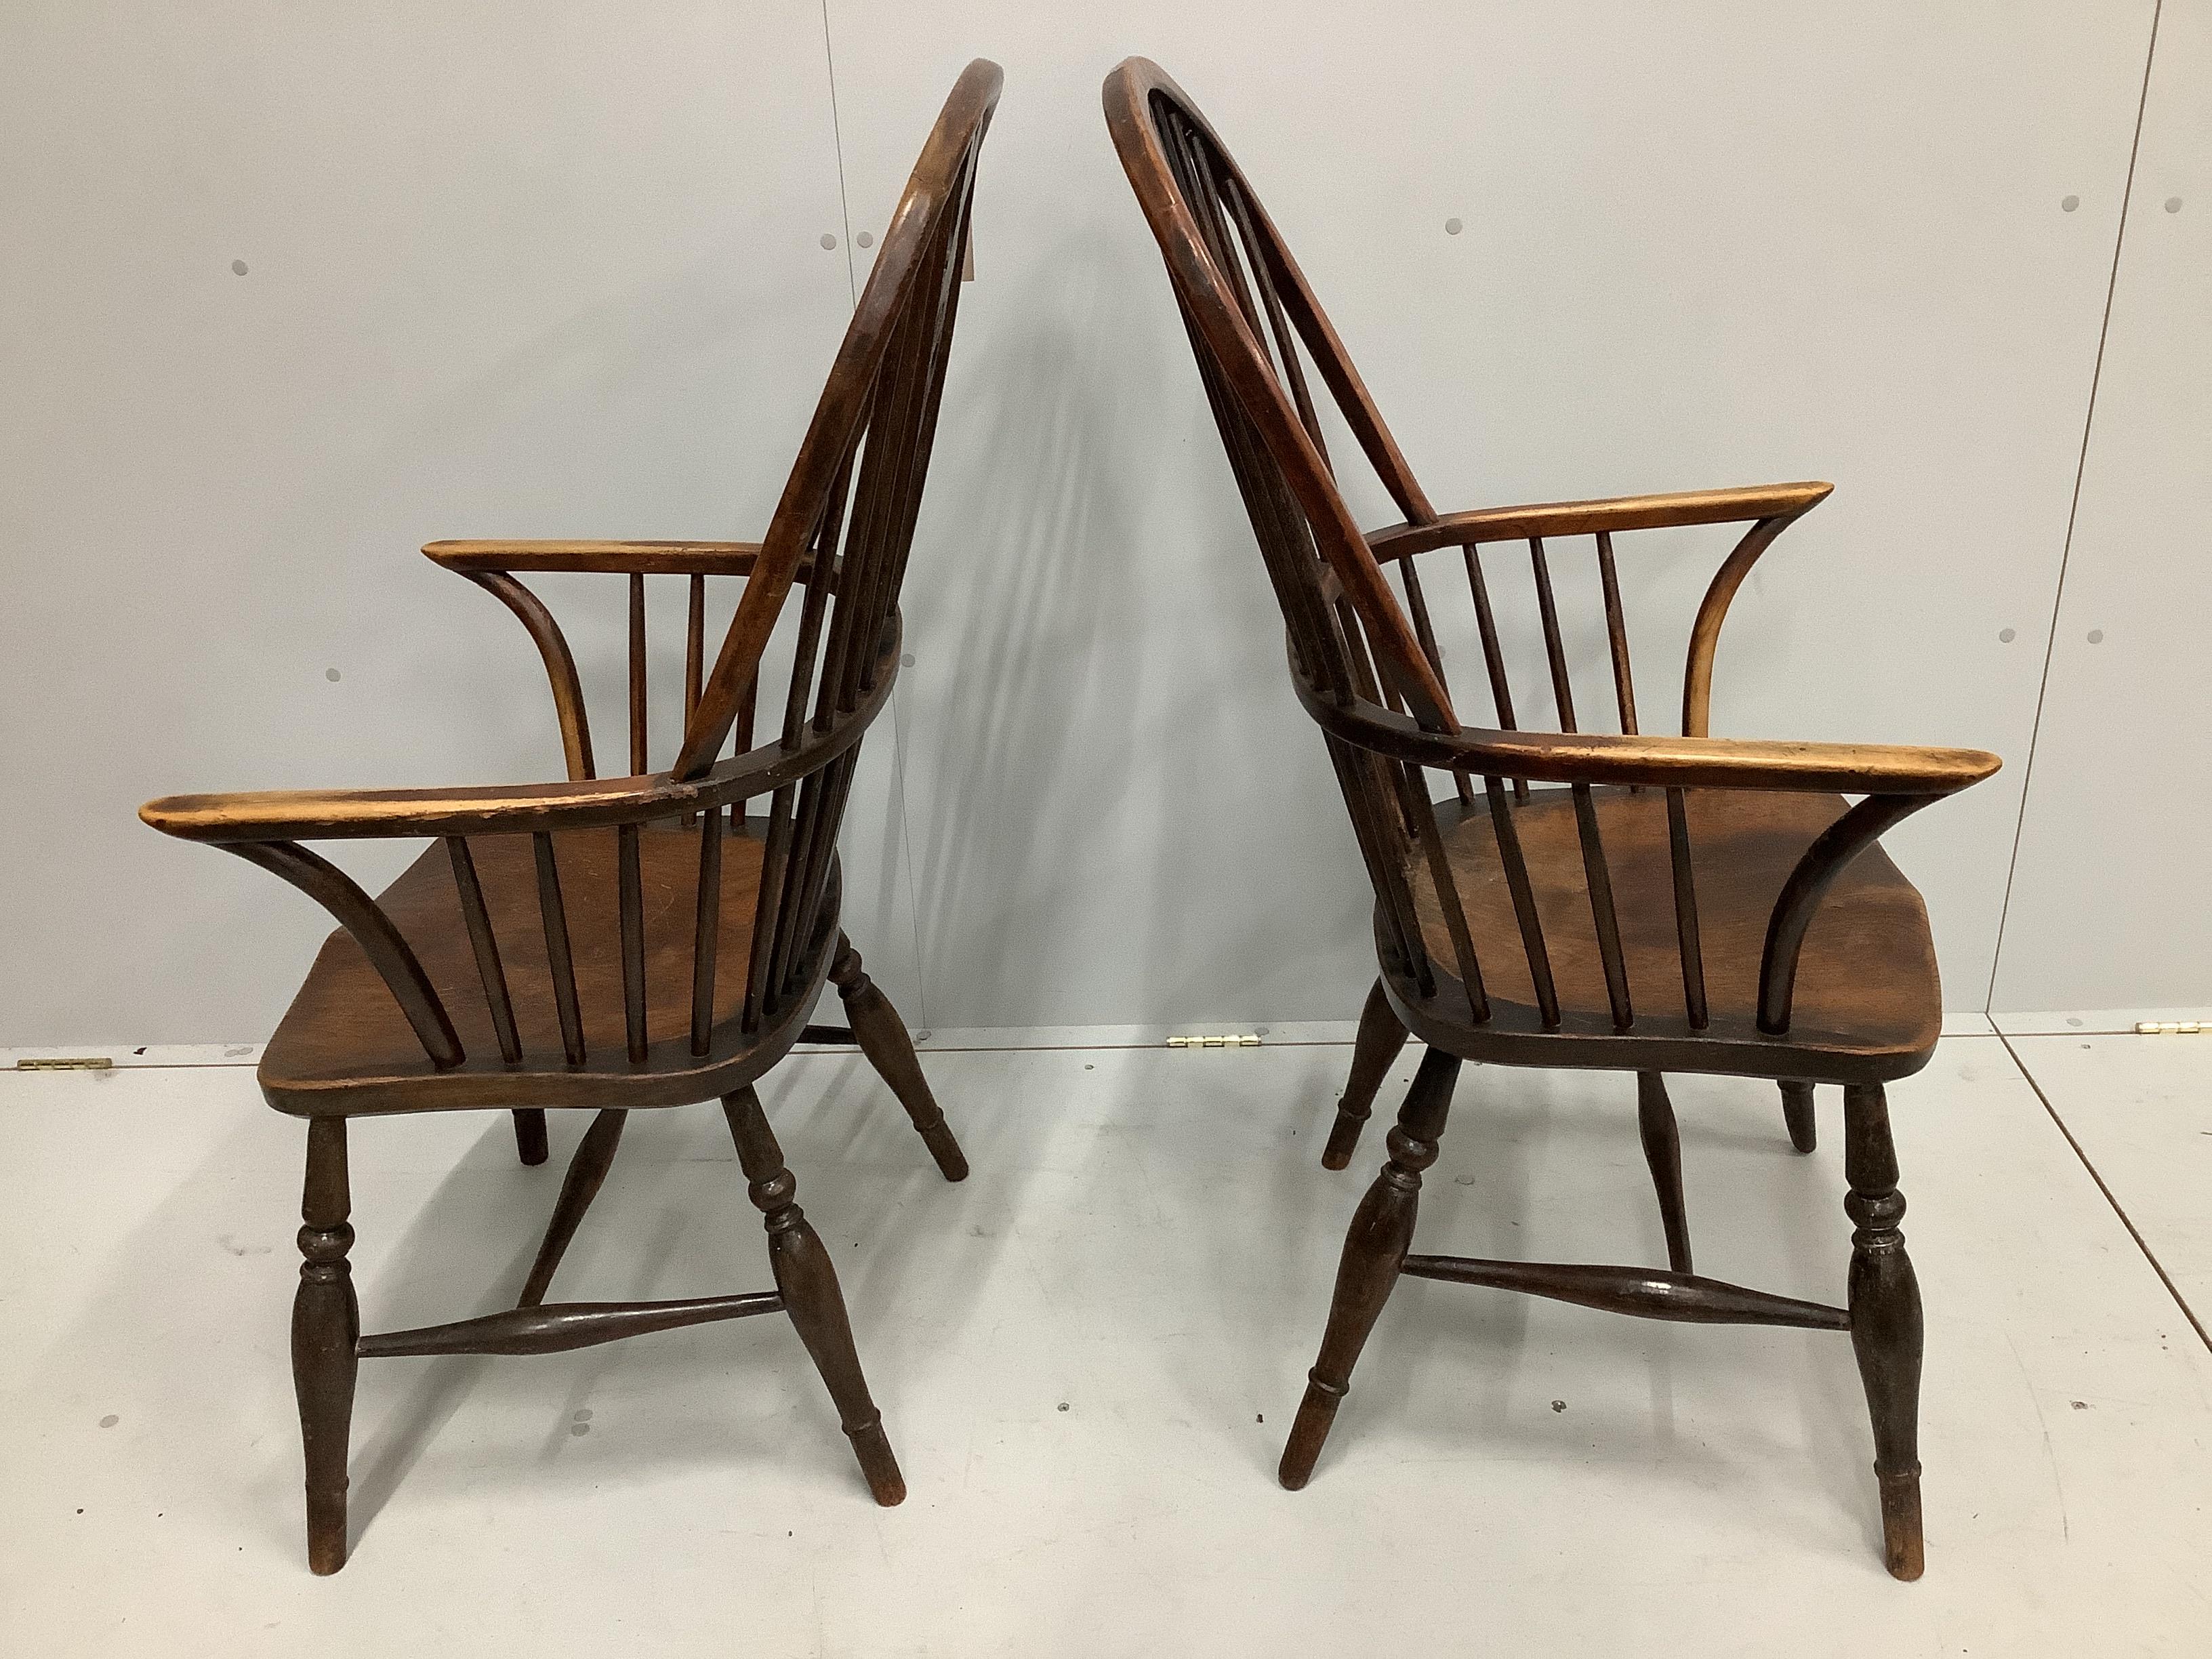 A pair of 19th century Thames Valley elm and beech Windsor wheelback armchairs, width 59cm, depth 43cm, height 114cm